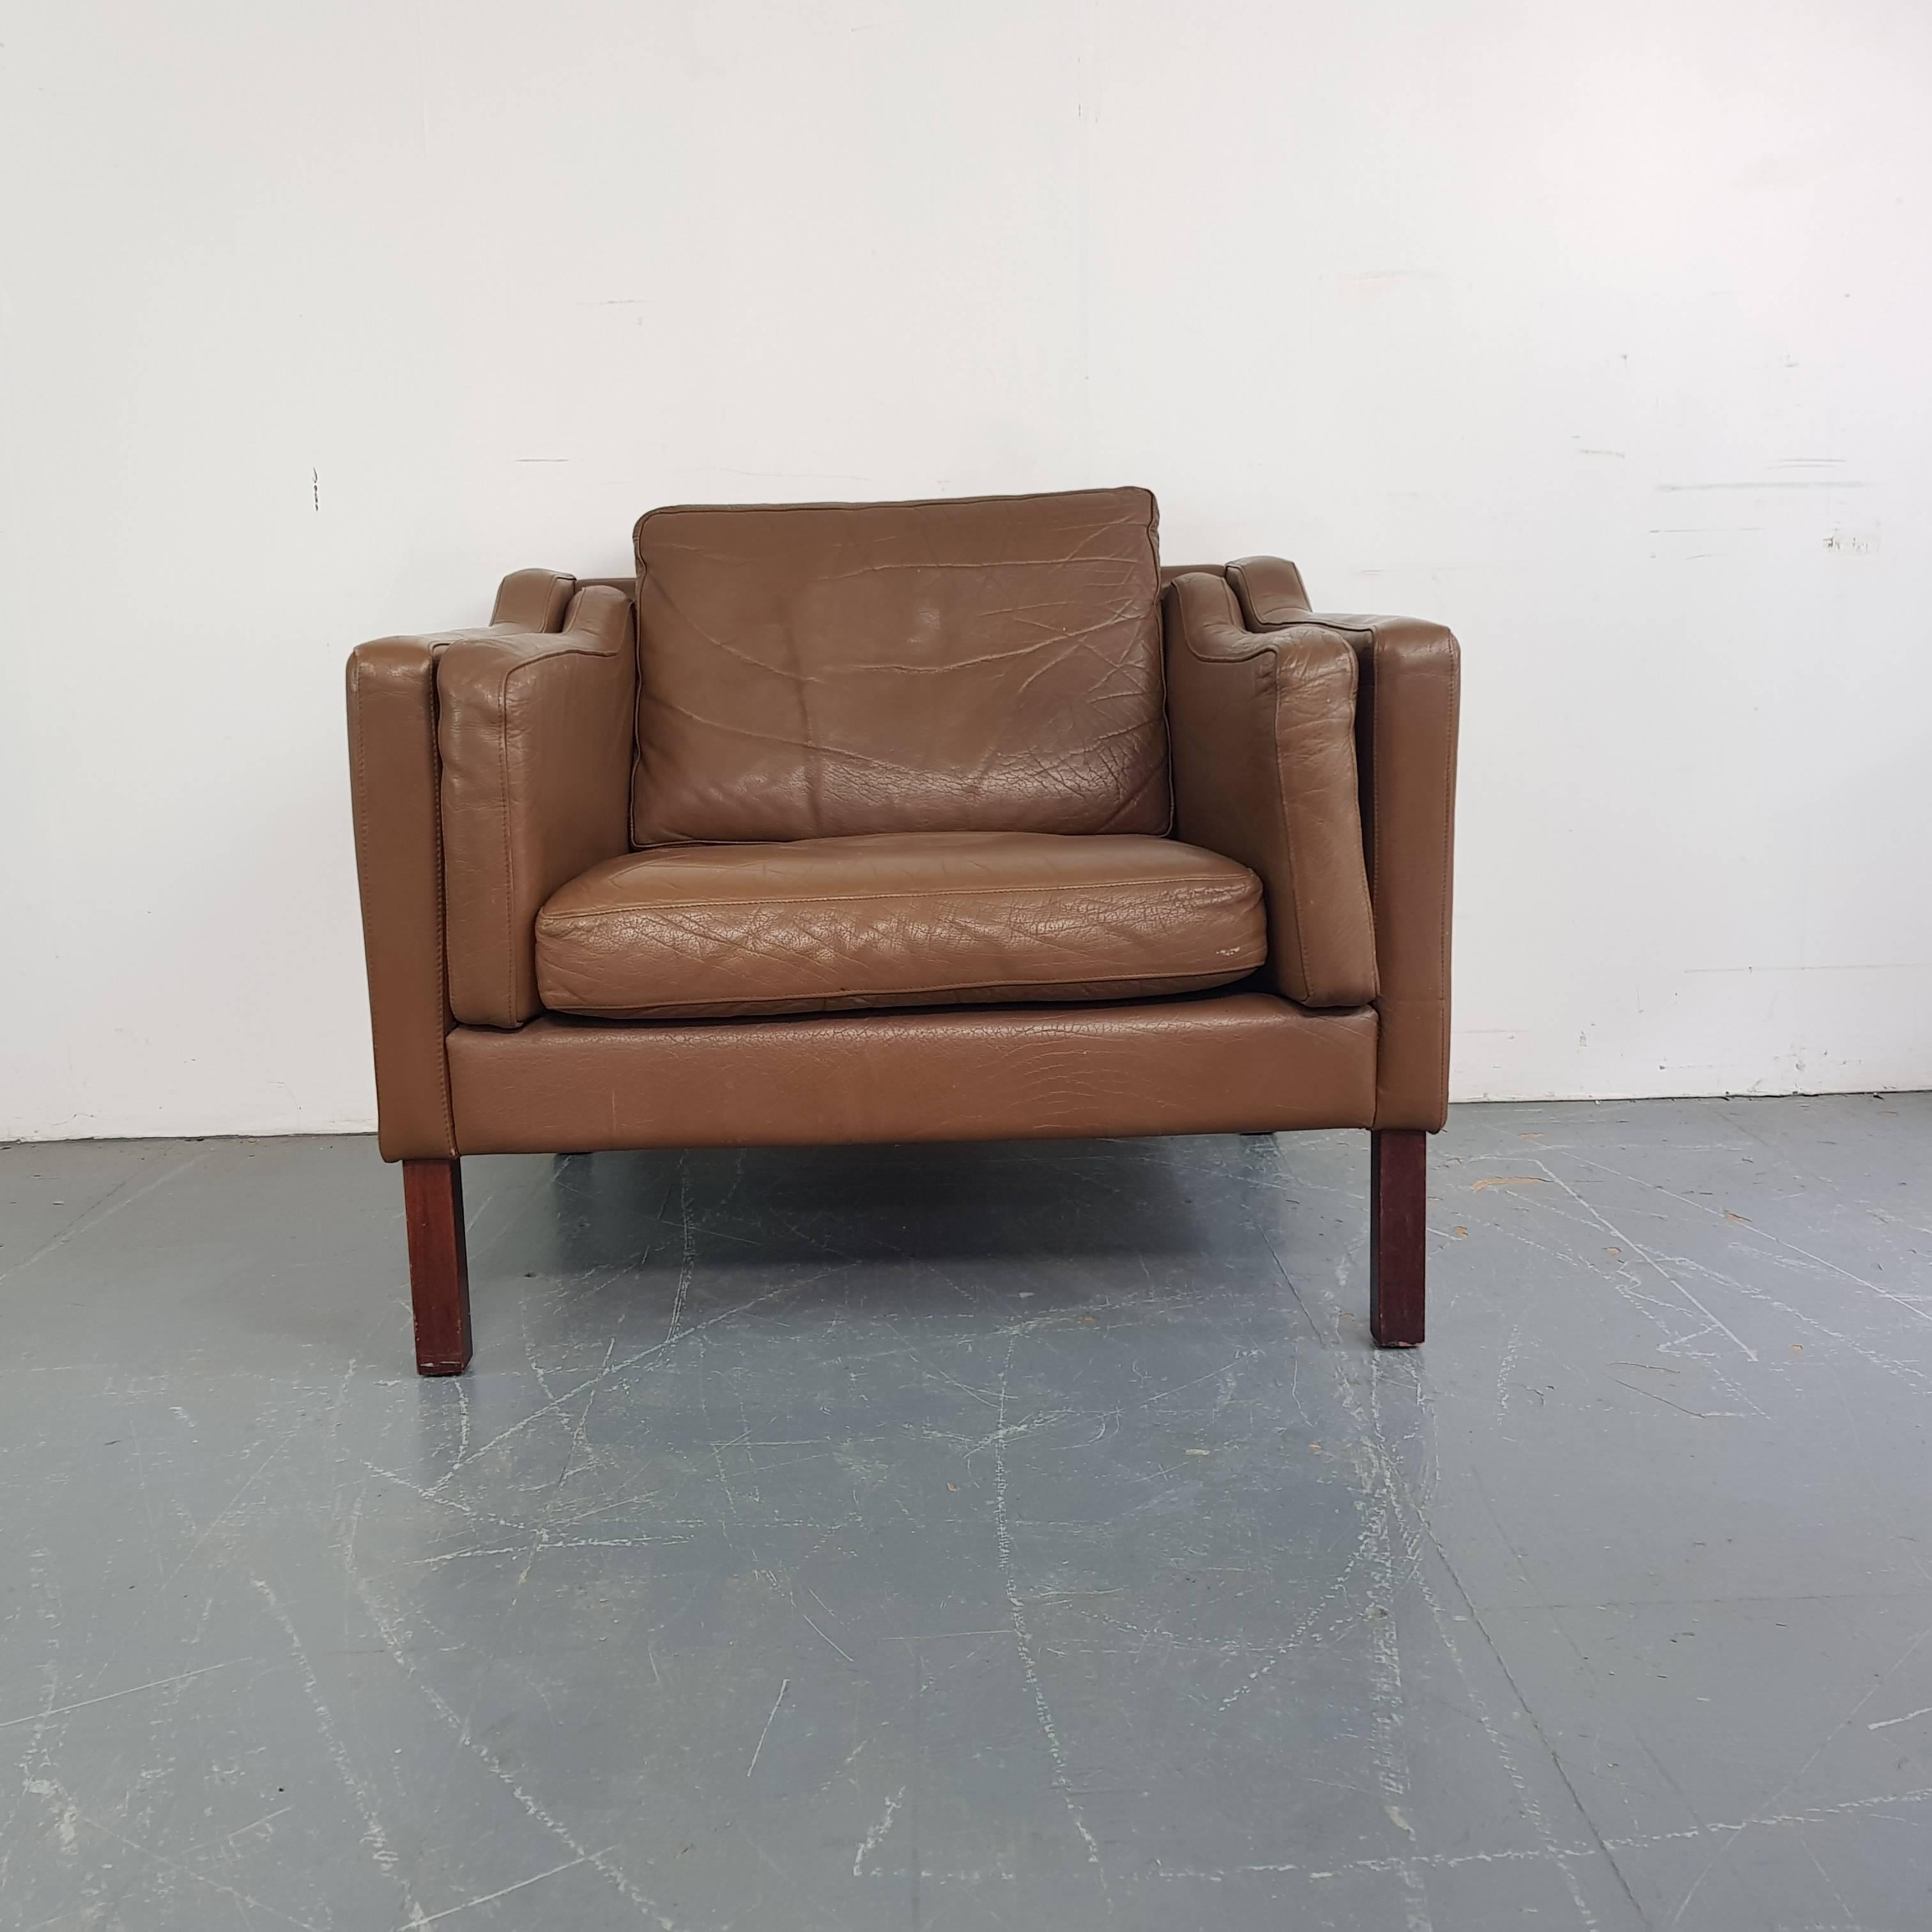 Gorgeous brown leather Mogensen style 1970s Danish armchair.
Detachable seat cushions.  Wooden legs.

Approximate dimensions:

Width 86cm

Height 71cm

Depth 82cm

Seat height 46cm.

In good vintage condition; some age-related wear,